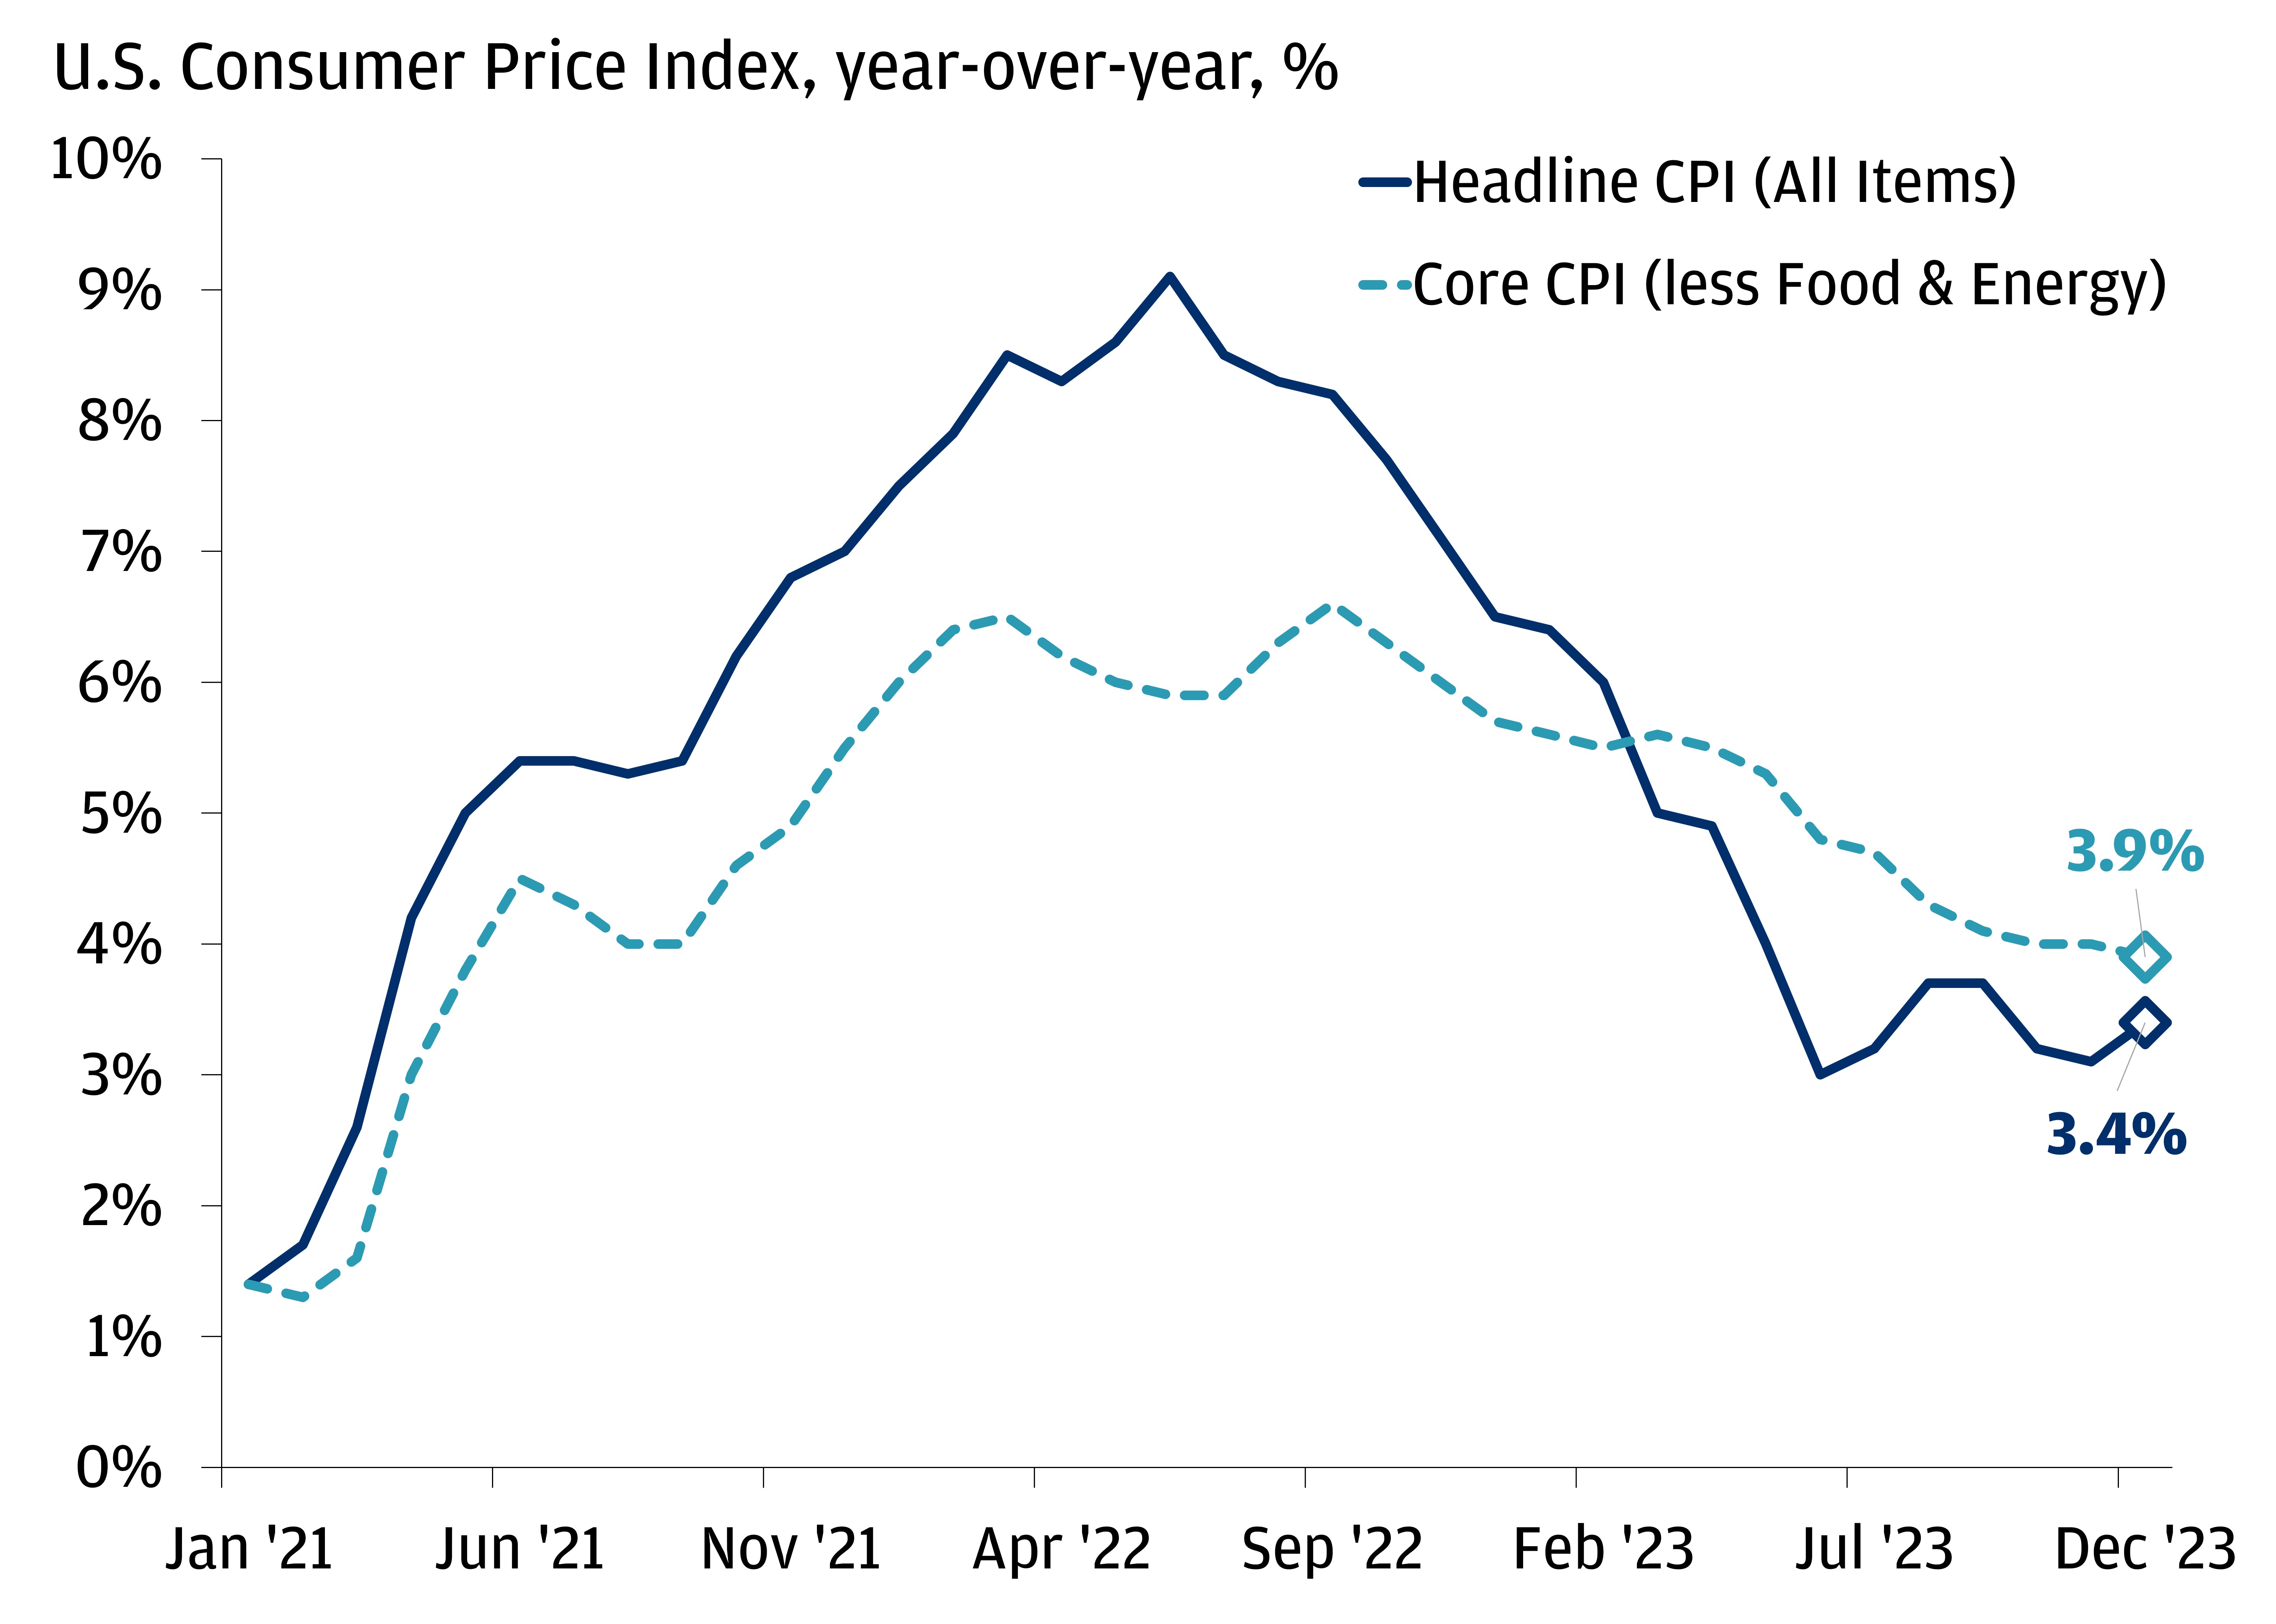 This chart shows U.S. headline CPI and core CPI from January 2021 to December 2023.